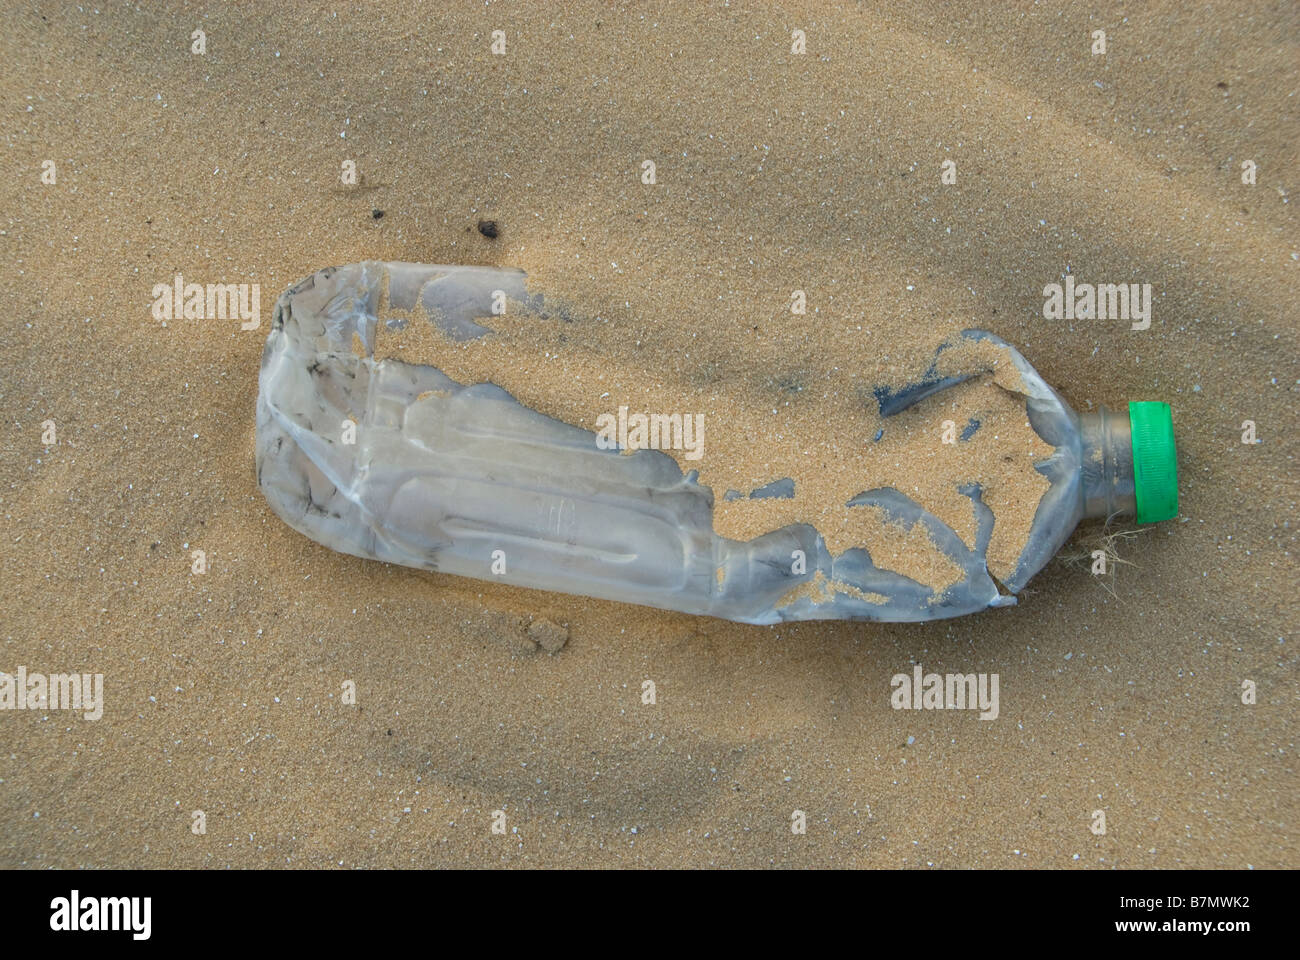 An empty smashed plastic water bottle in a sandy beach Stock Photo